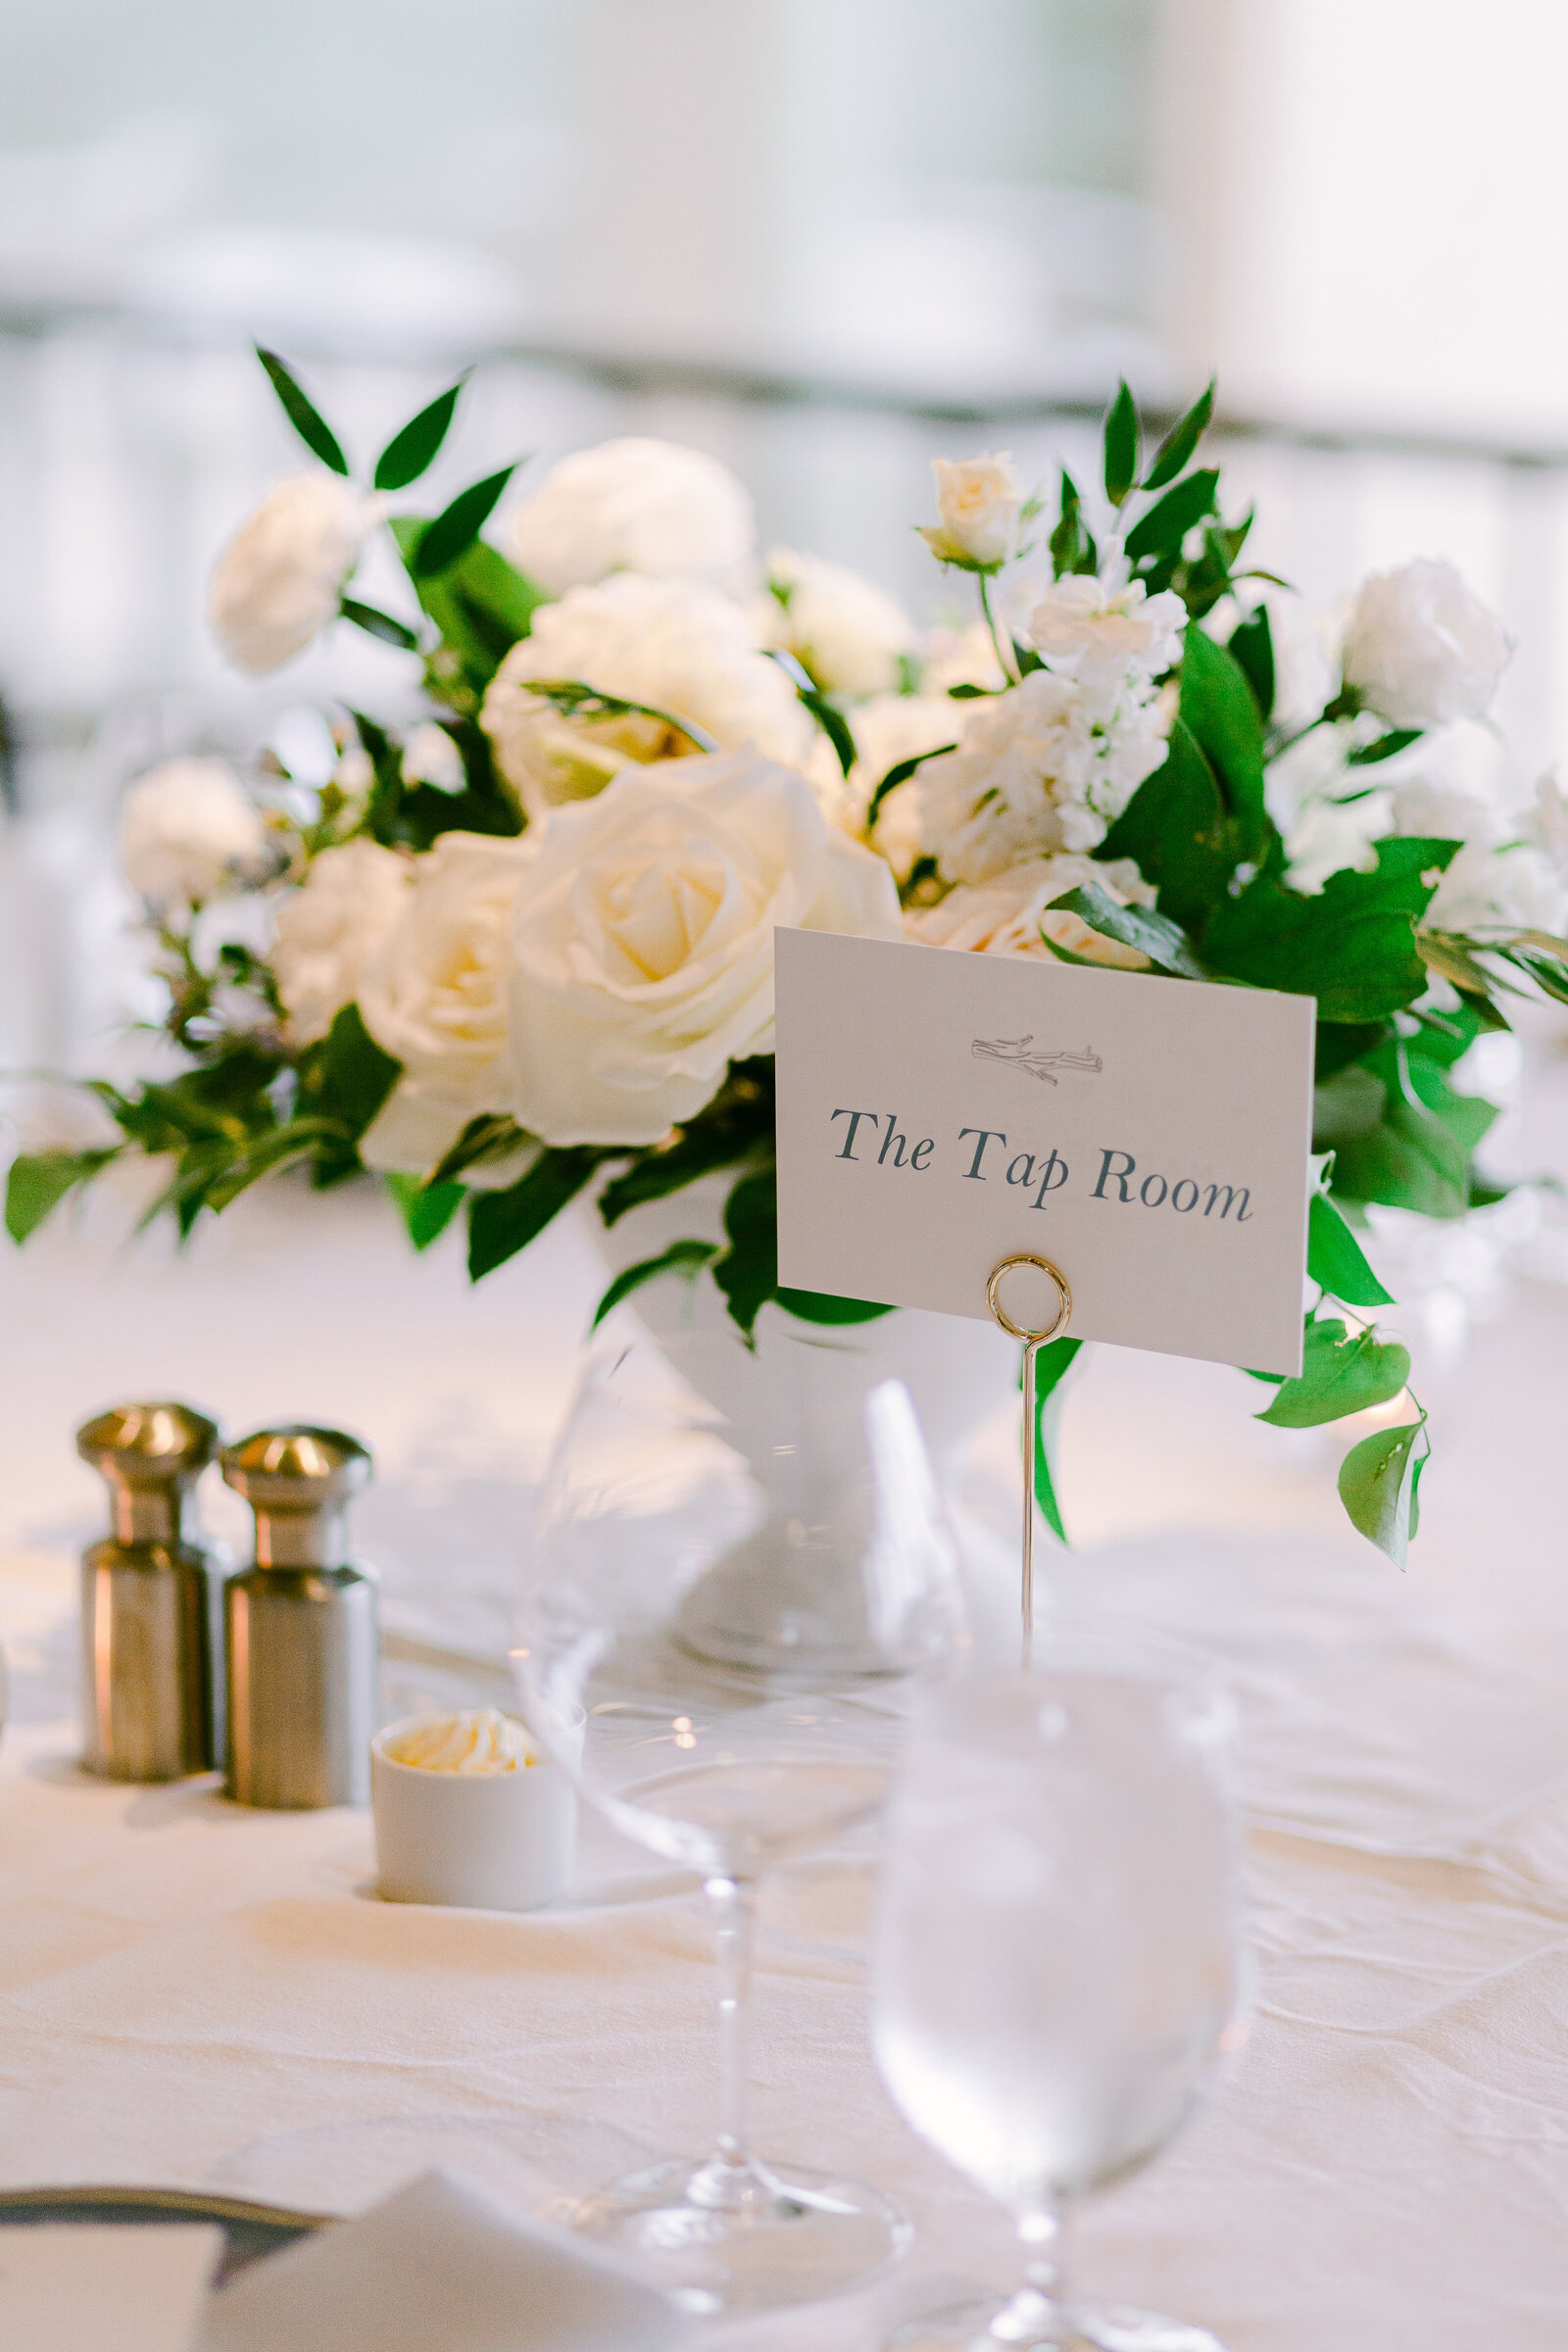 Custom Table names and flowers